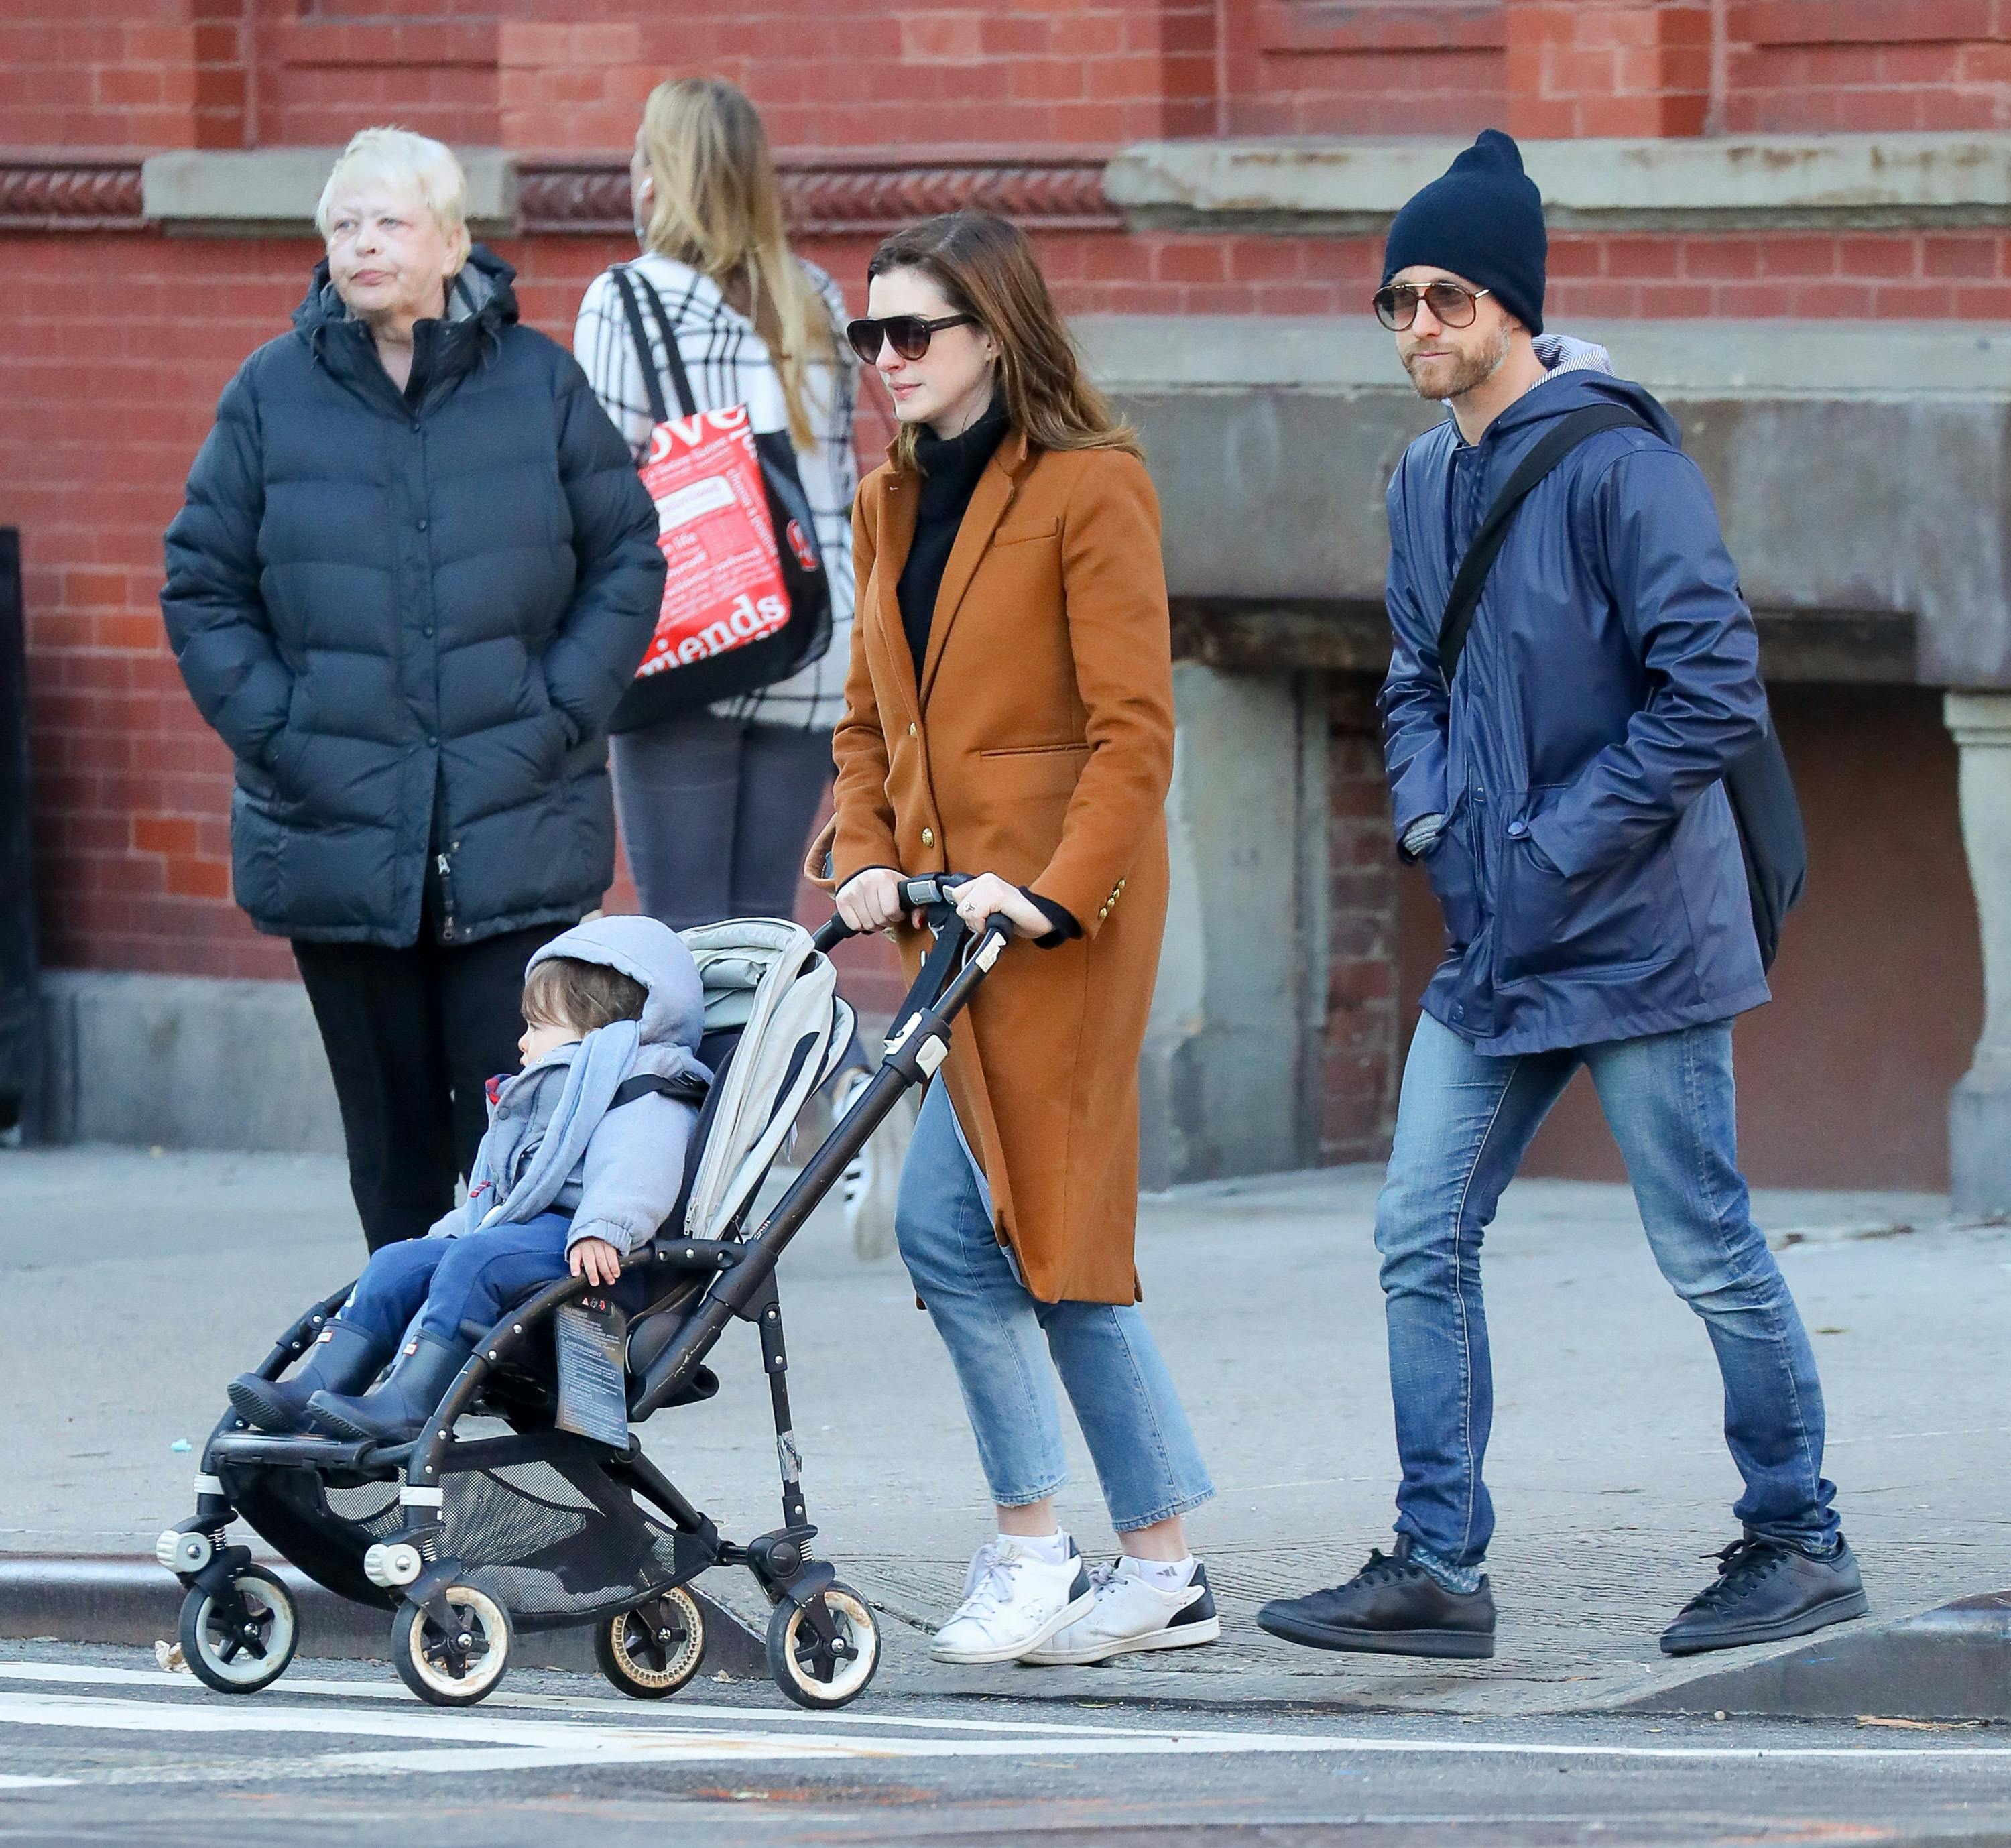 EXCLUSIVE: Anne Hathaway and husband Adam take their son to a playground in Chelsea neighborhood in NYC. ***SPECIAL INSTRUCTIONS*** Please pixelate children's faces before publication.***. 21 Nov 2017 Pictured: Anne Hathaway. Photo credit: ZapatA/MEGA TheMegaAgency.com +1 888 505 6342 (Mega Agency TagID: MEGA121145_015.jpg) [Photo via Mega Agency]